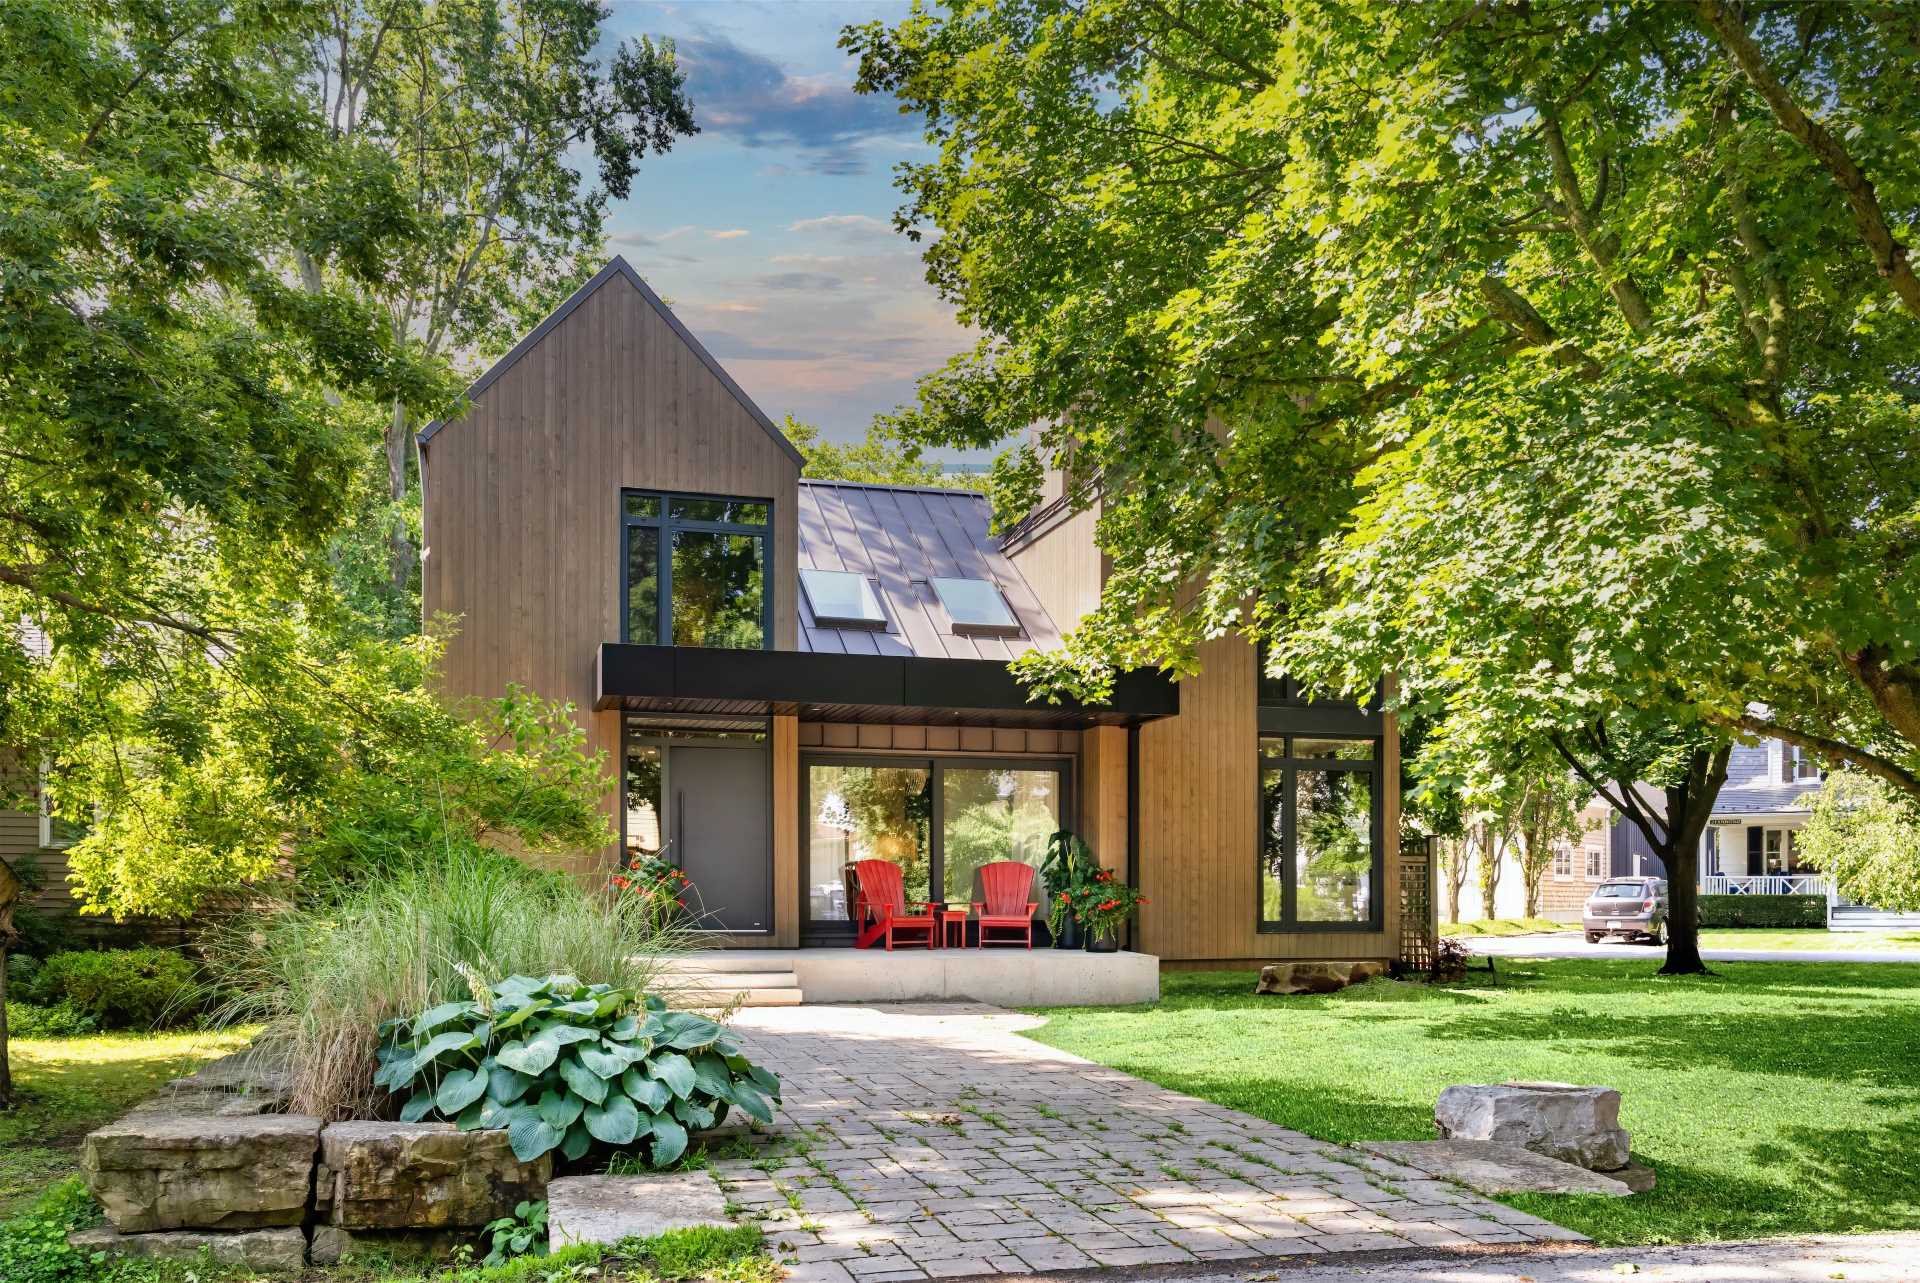 This 1980s ،me was transformed to include Scandinavian influence externally, and playful sophistication within, while neutral wood tones found in the vertical exterior siding, creates an intimate connection with its scenic lakeside locale.